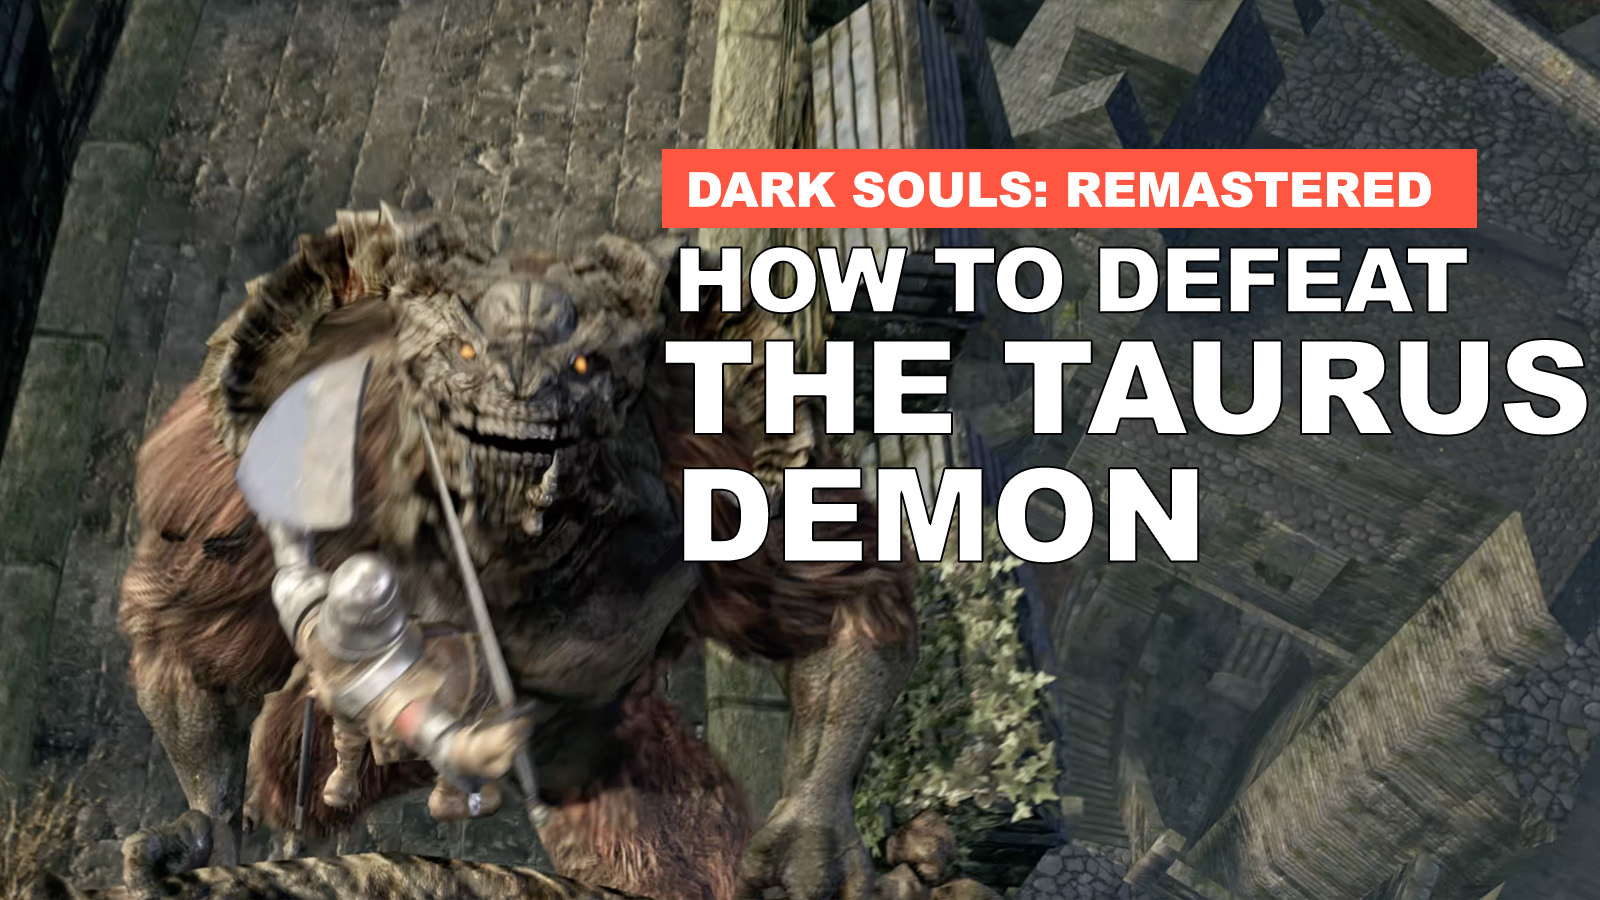 How To Defeat The Taurus Demon In Dark Souls: Remastered